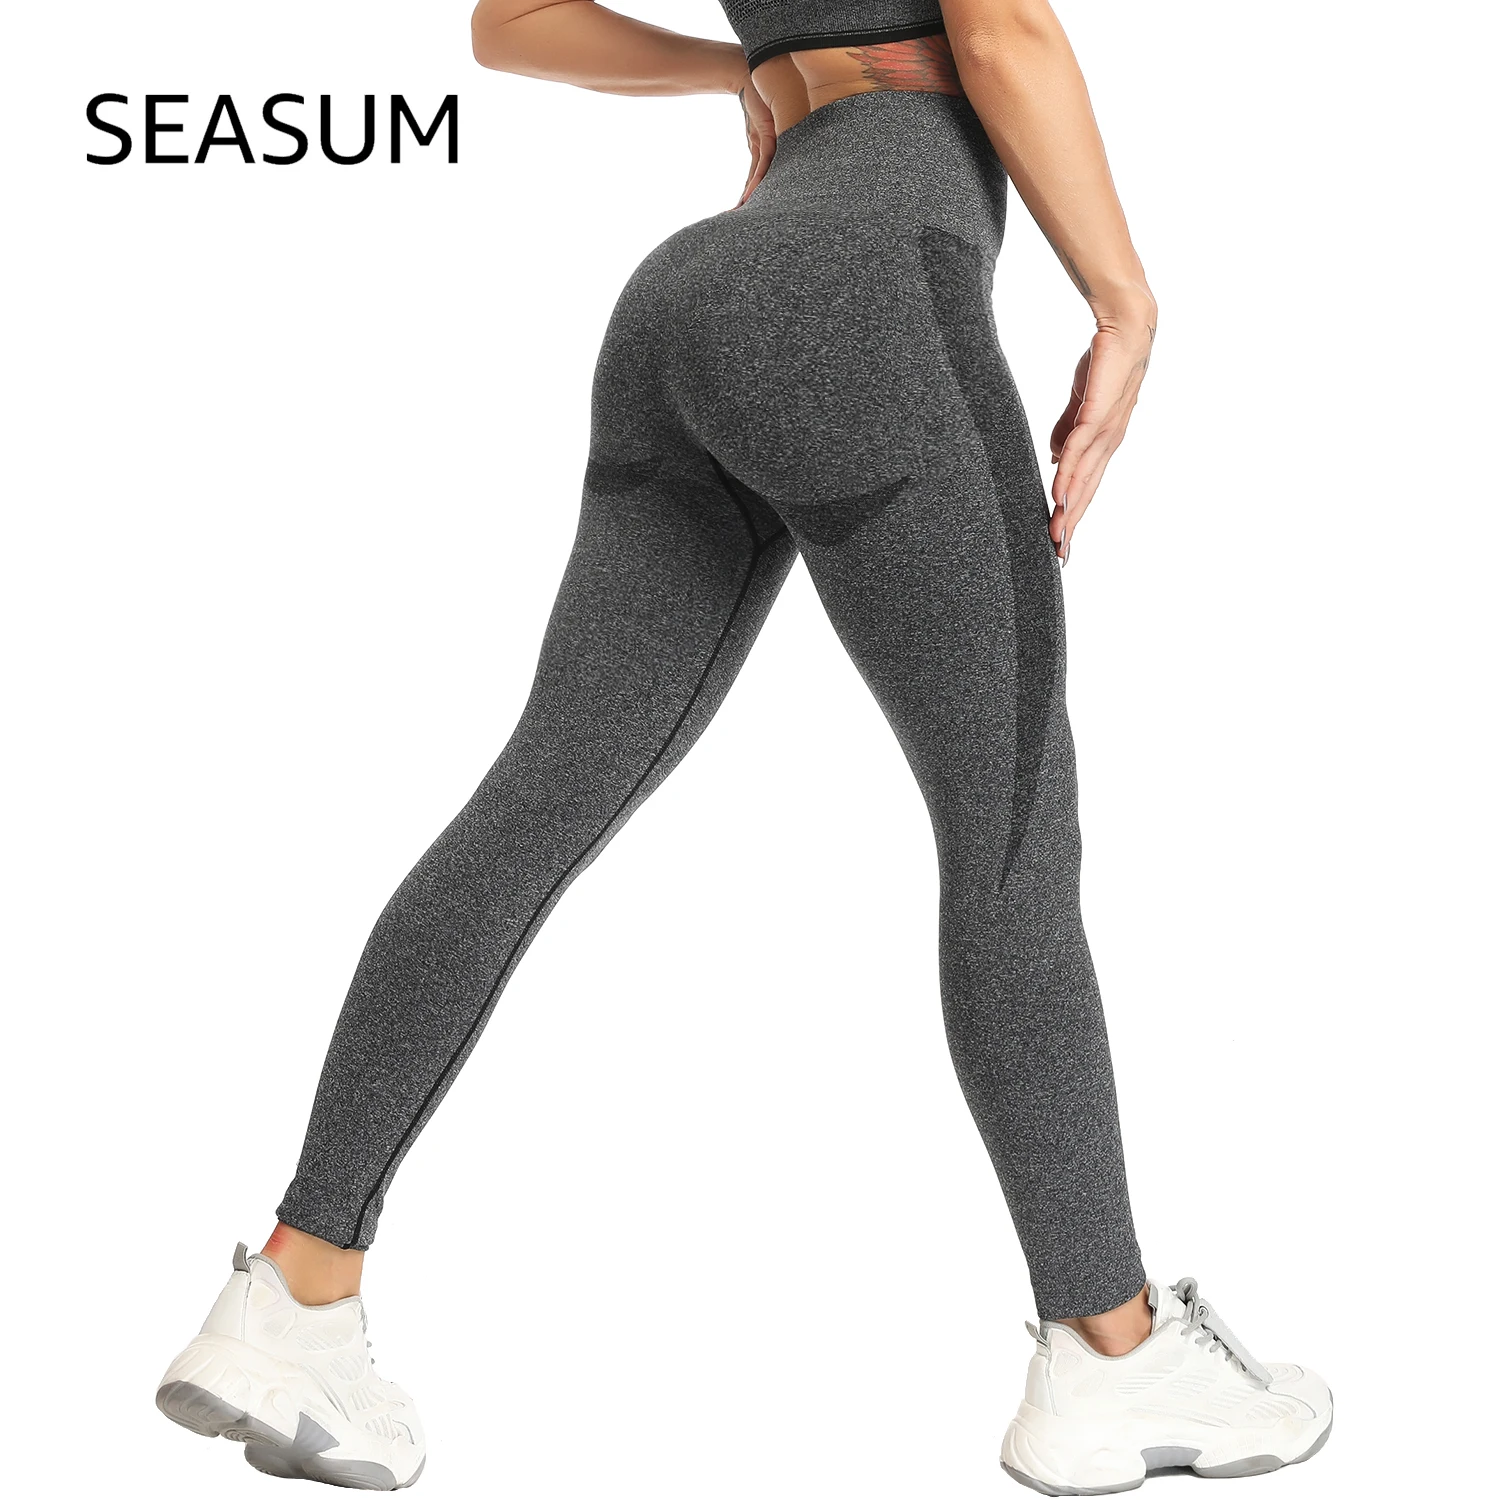 

SEASUM Seamless Workout Leggings Women High Waisted Fitness Yoga Pants Butt Lift Stretchy Tummy Control Trousers Gym Girl Tights